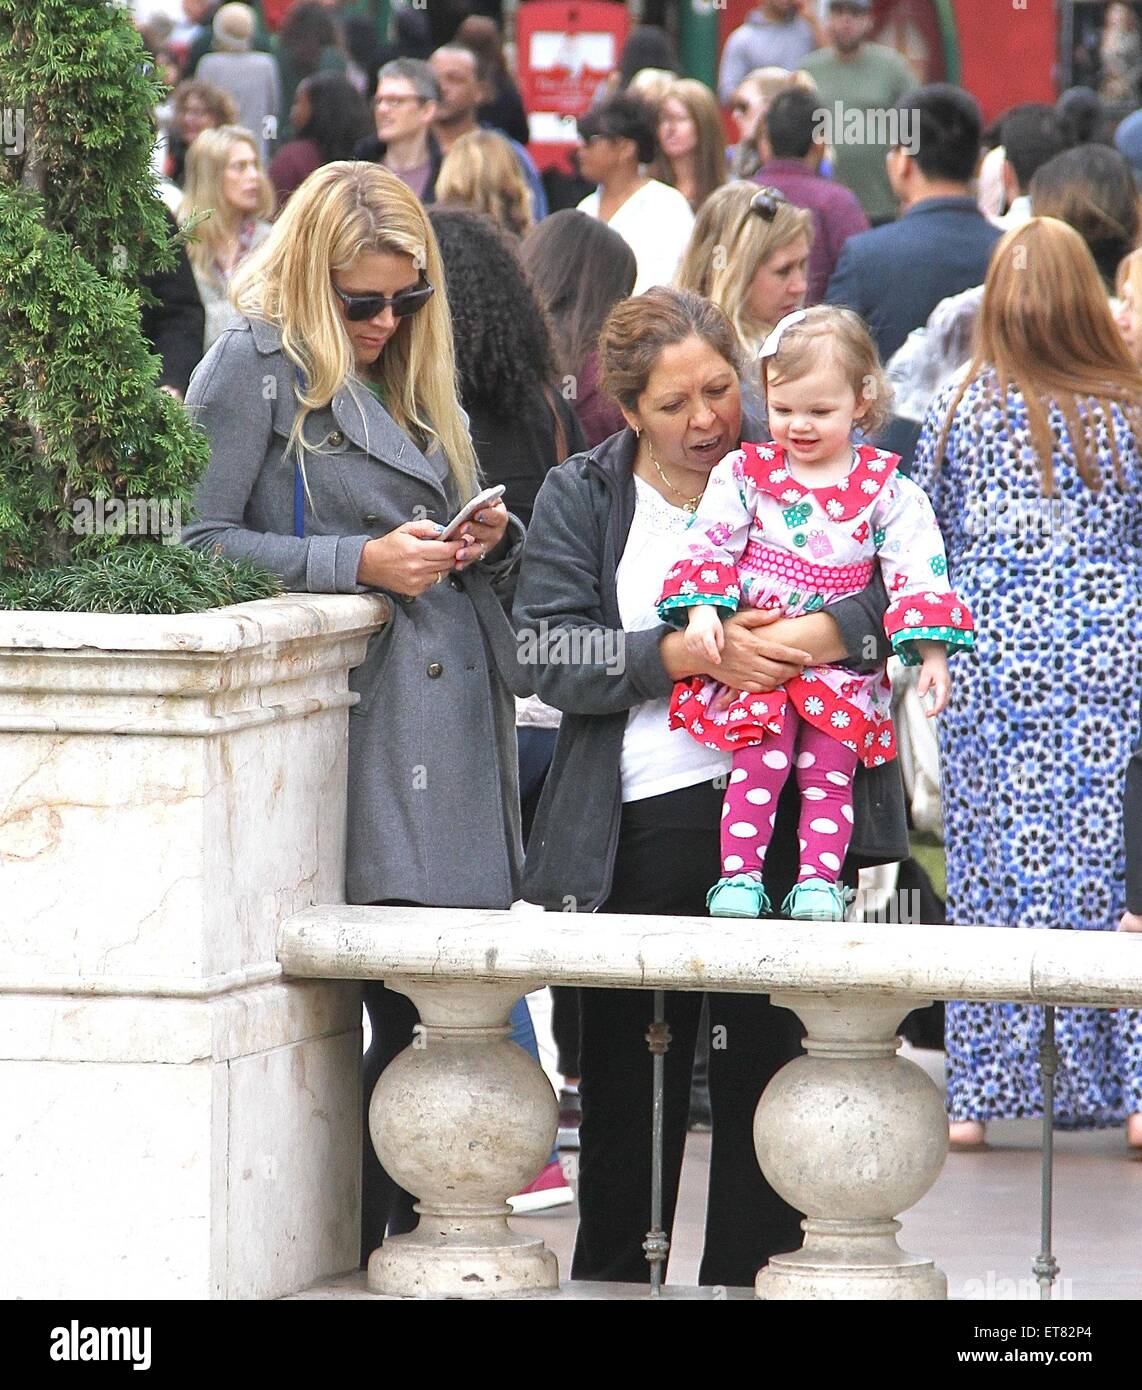 Busy Philipps spotted shopping at The Grove with her two daughters, Birdie and Cricket Silverstein  Featuring: Busy Philipps, Cricket Silverstein Where: Hollywood, California, United States When: 19 Dec 2014 Credit: WENN.com Stock Photo